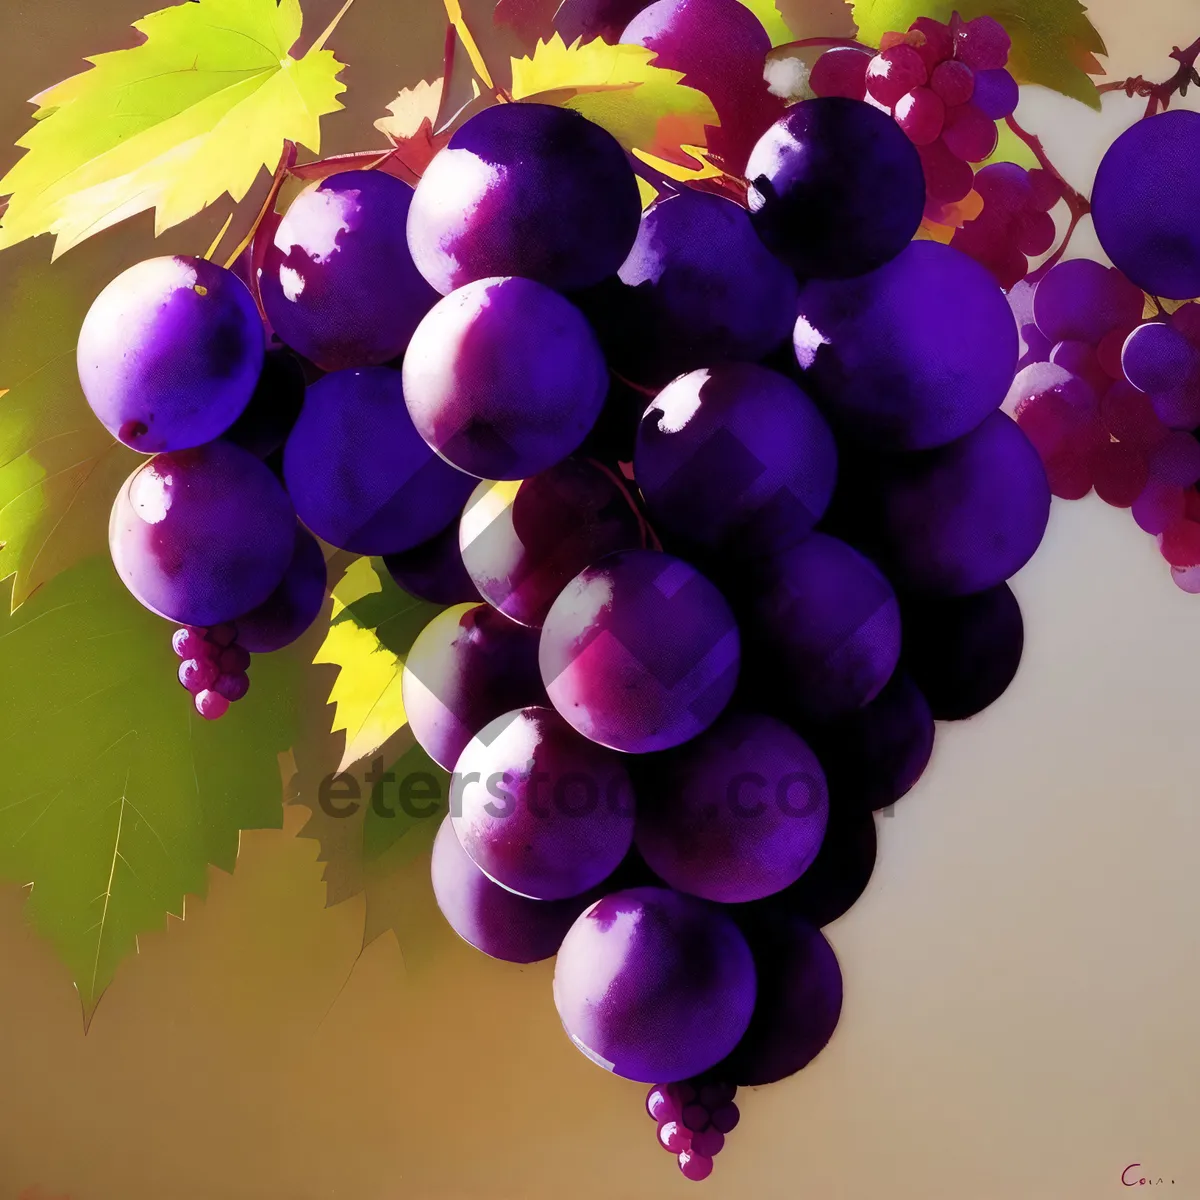 Picture of Vibrant Autumn Harvest: Beautiful, Ripe Grapes for Wine